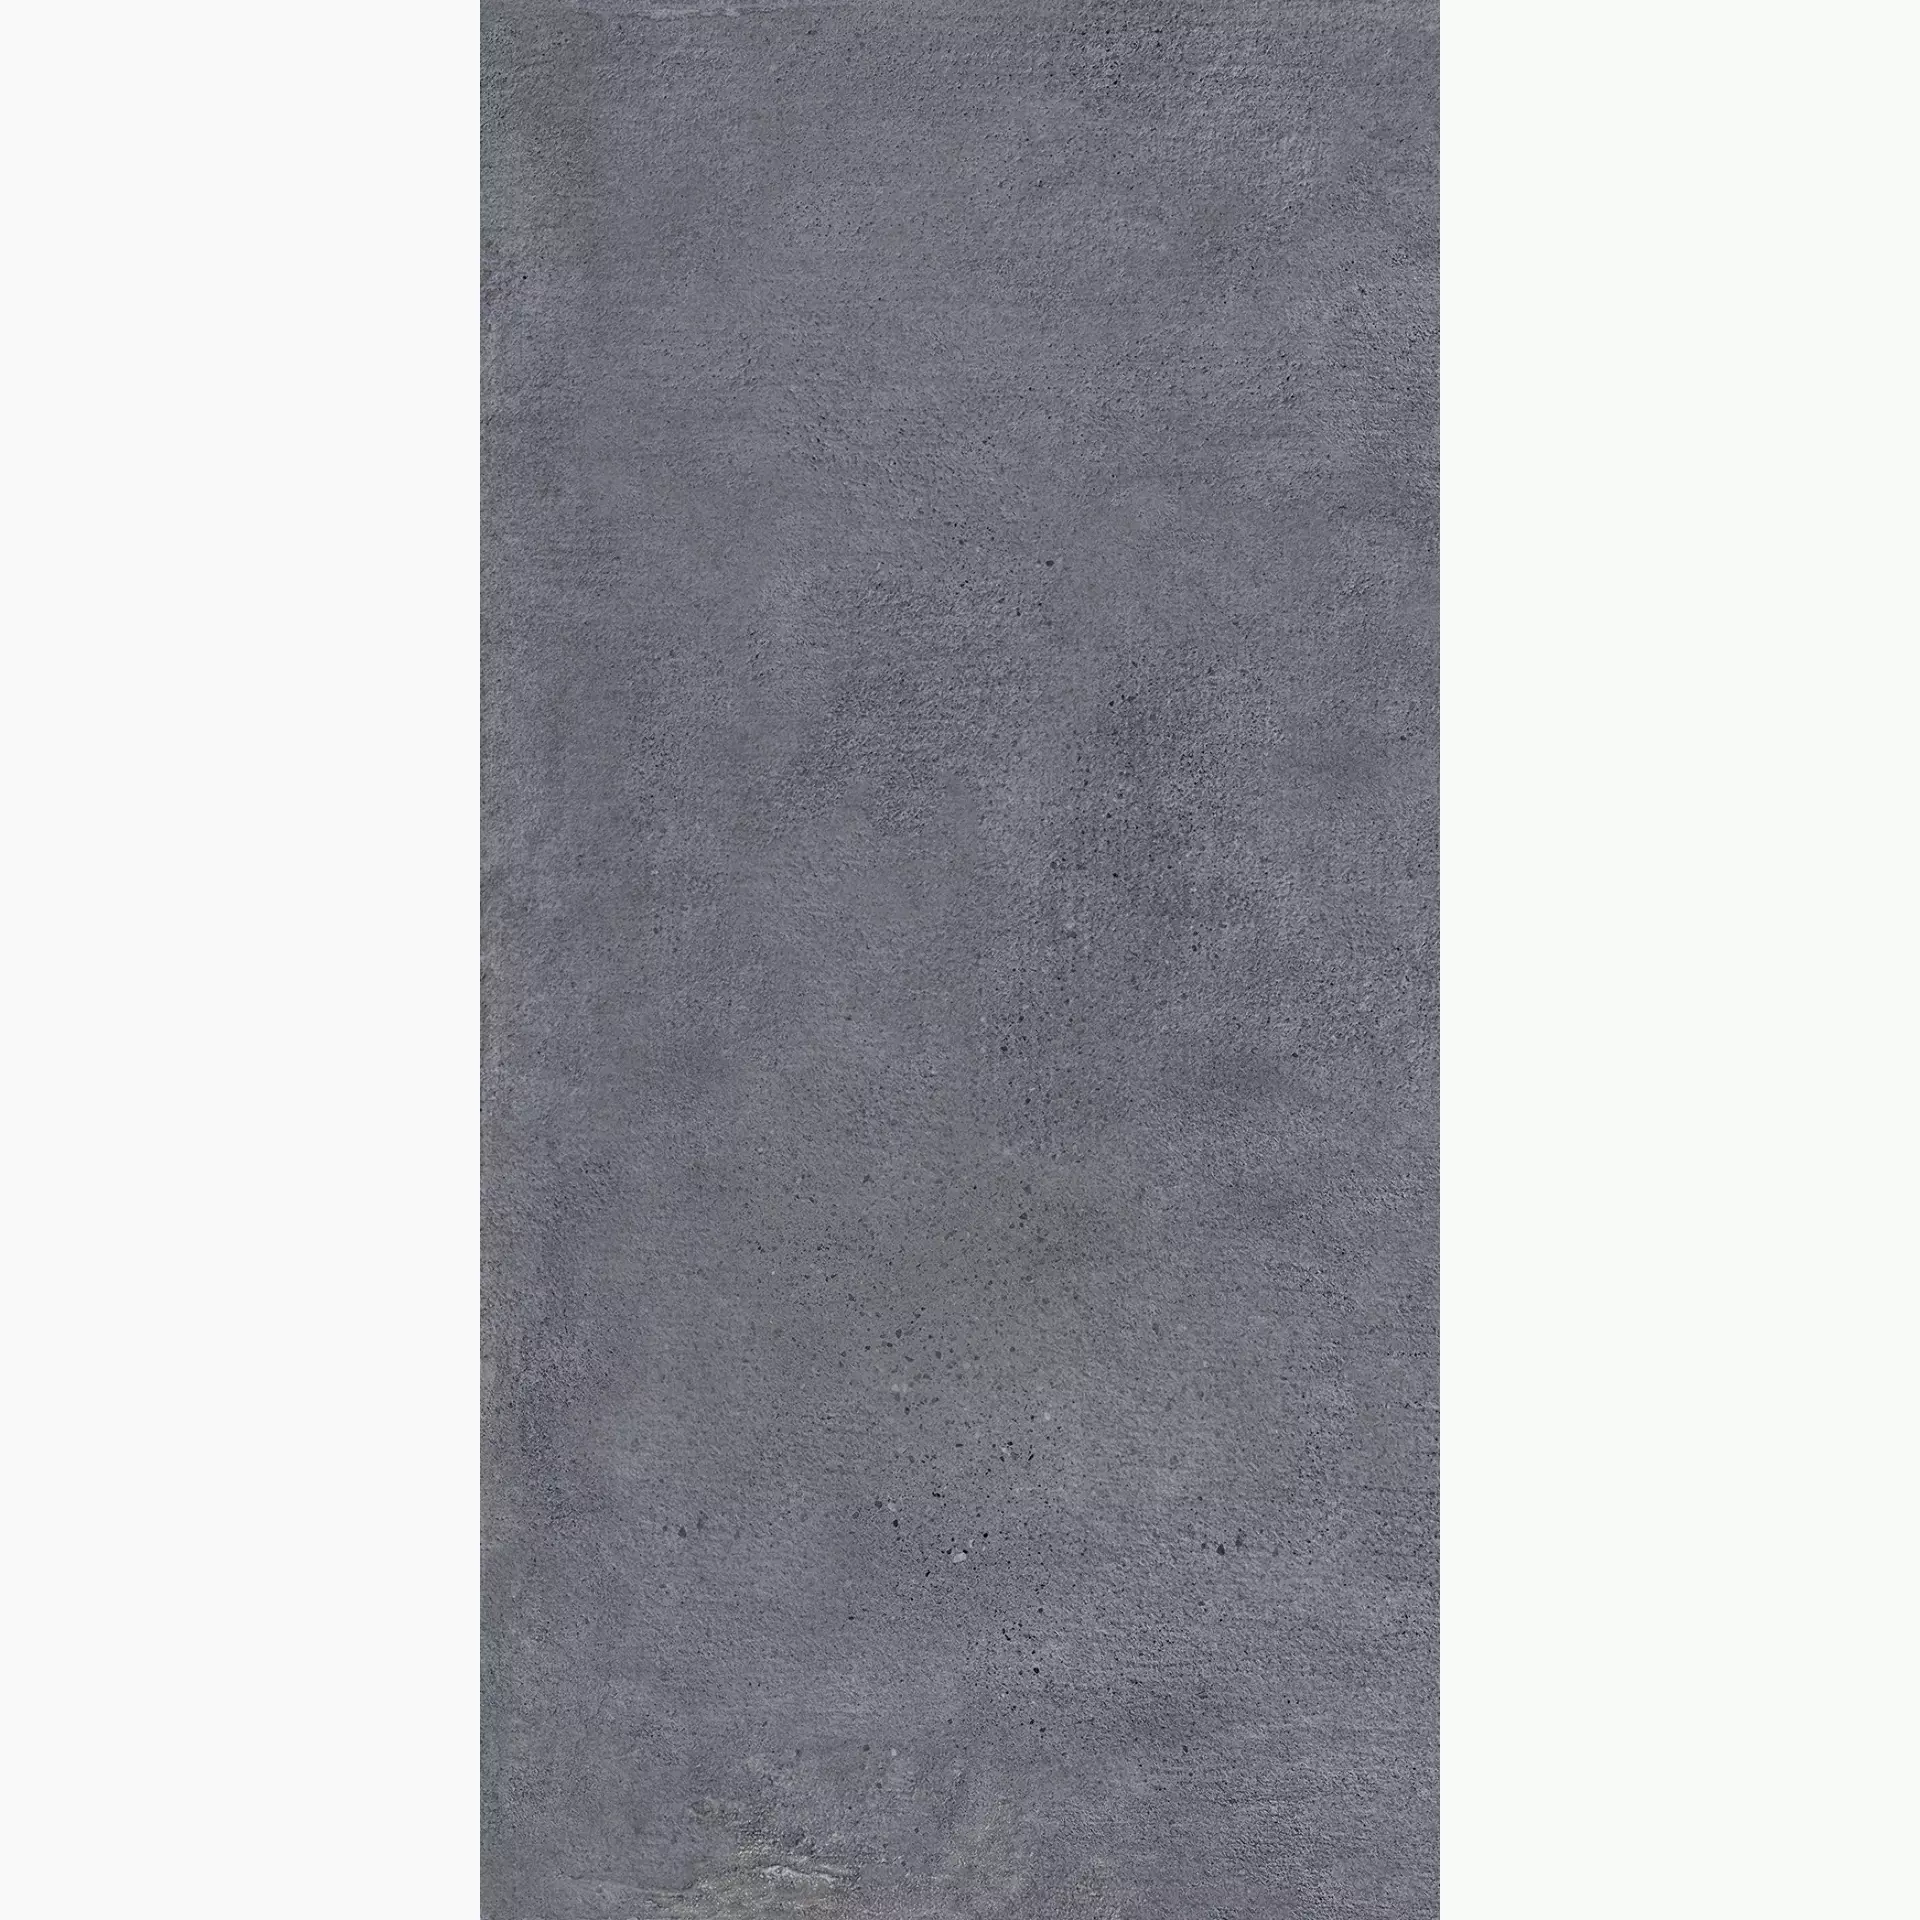 Keope Urban Anthracite Strutturato 44503349 30x60cm rectified 8,5mm